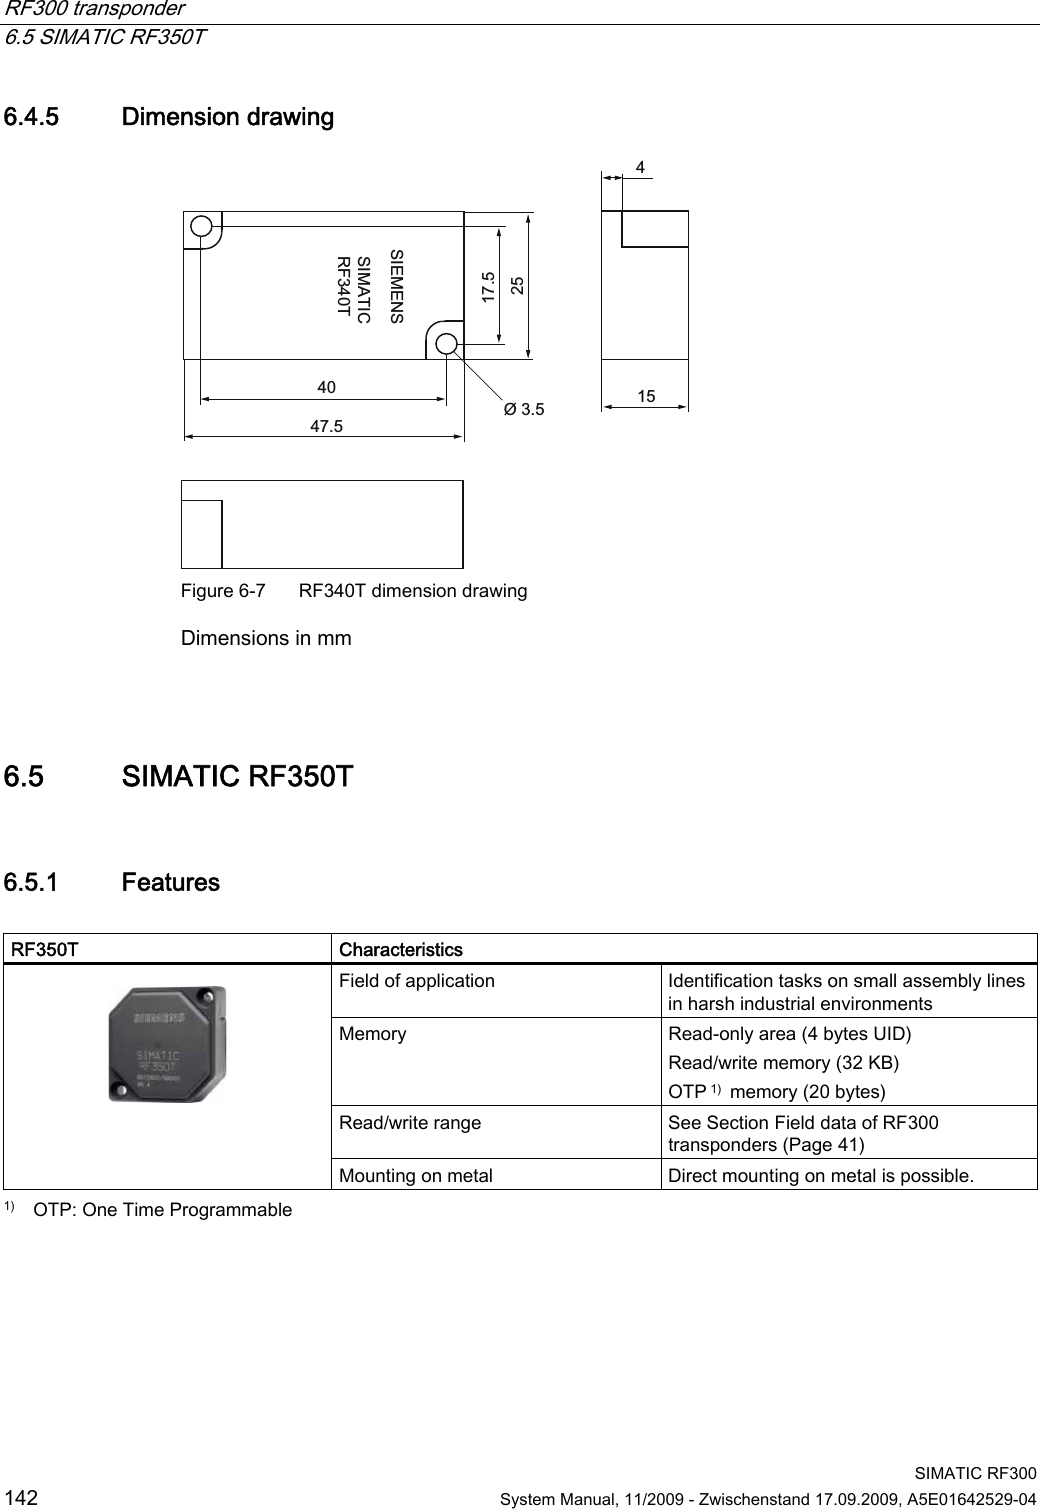 RF300 transponder   6.5 SIMATIC RF350T  SIMATIC RF300 142  System Manual, 11/2009 - Zwischenstand 17.09.2009, A5E01642529-04 6.4.5 Dimension drawing 6,(0(166,0$7,&amp;5)7 Figure 6-7  RF340T dimension drawing Dimensions in mm  6.5 SIMATIC RF350T 6.5.1 Features  RF350T   Characteristics Field of application  Identification tasks on small assembly lines in harsh industrial environments Memory  Read-only area (4 bytes UID)  Read/write memory (32 KB)  OTP 1)  memory (20 bytes) Read/write range  See Section Field data of RF300 transponders (Page 41)    Mounting on metal  Direct mounting on metal is possible. 1)   OTP: One Time Programmable 